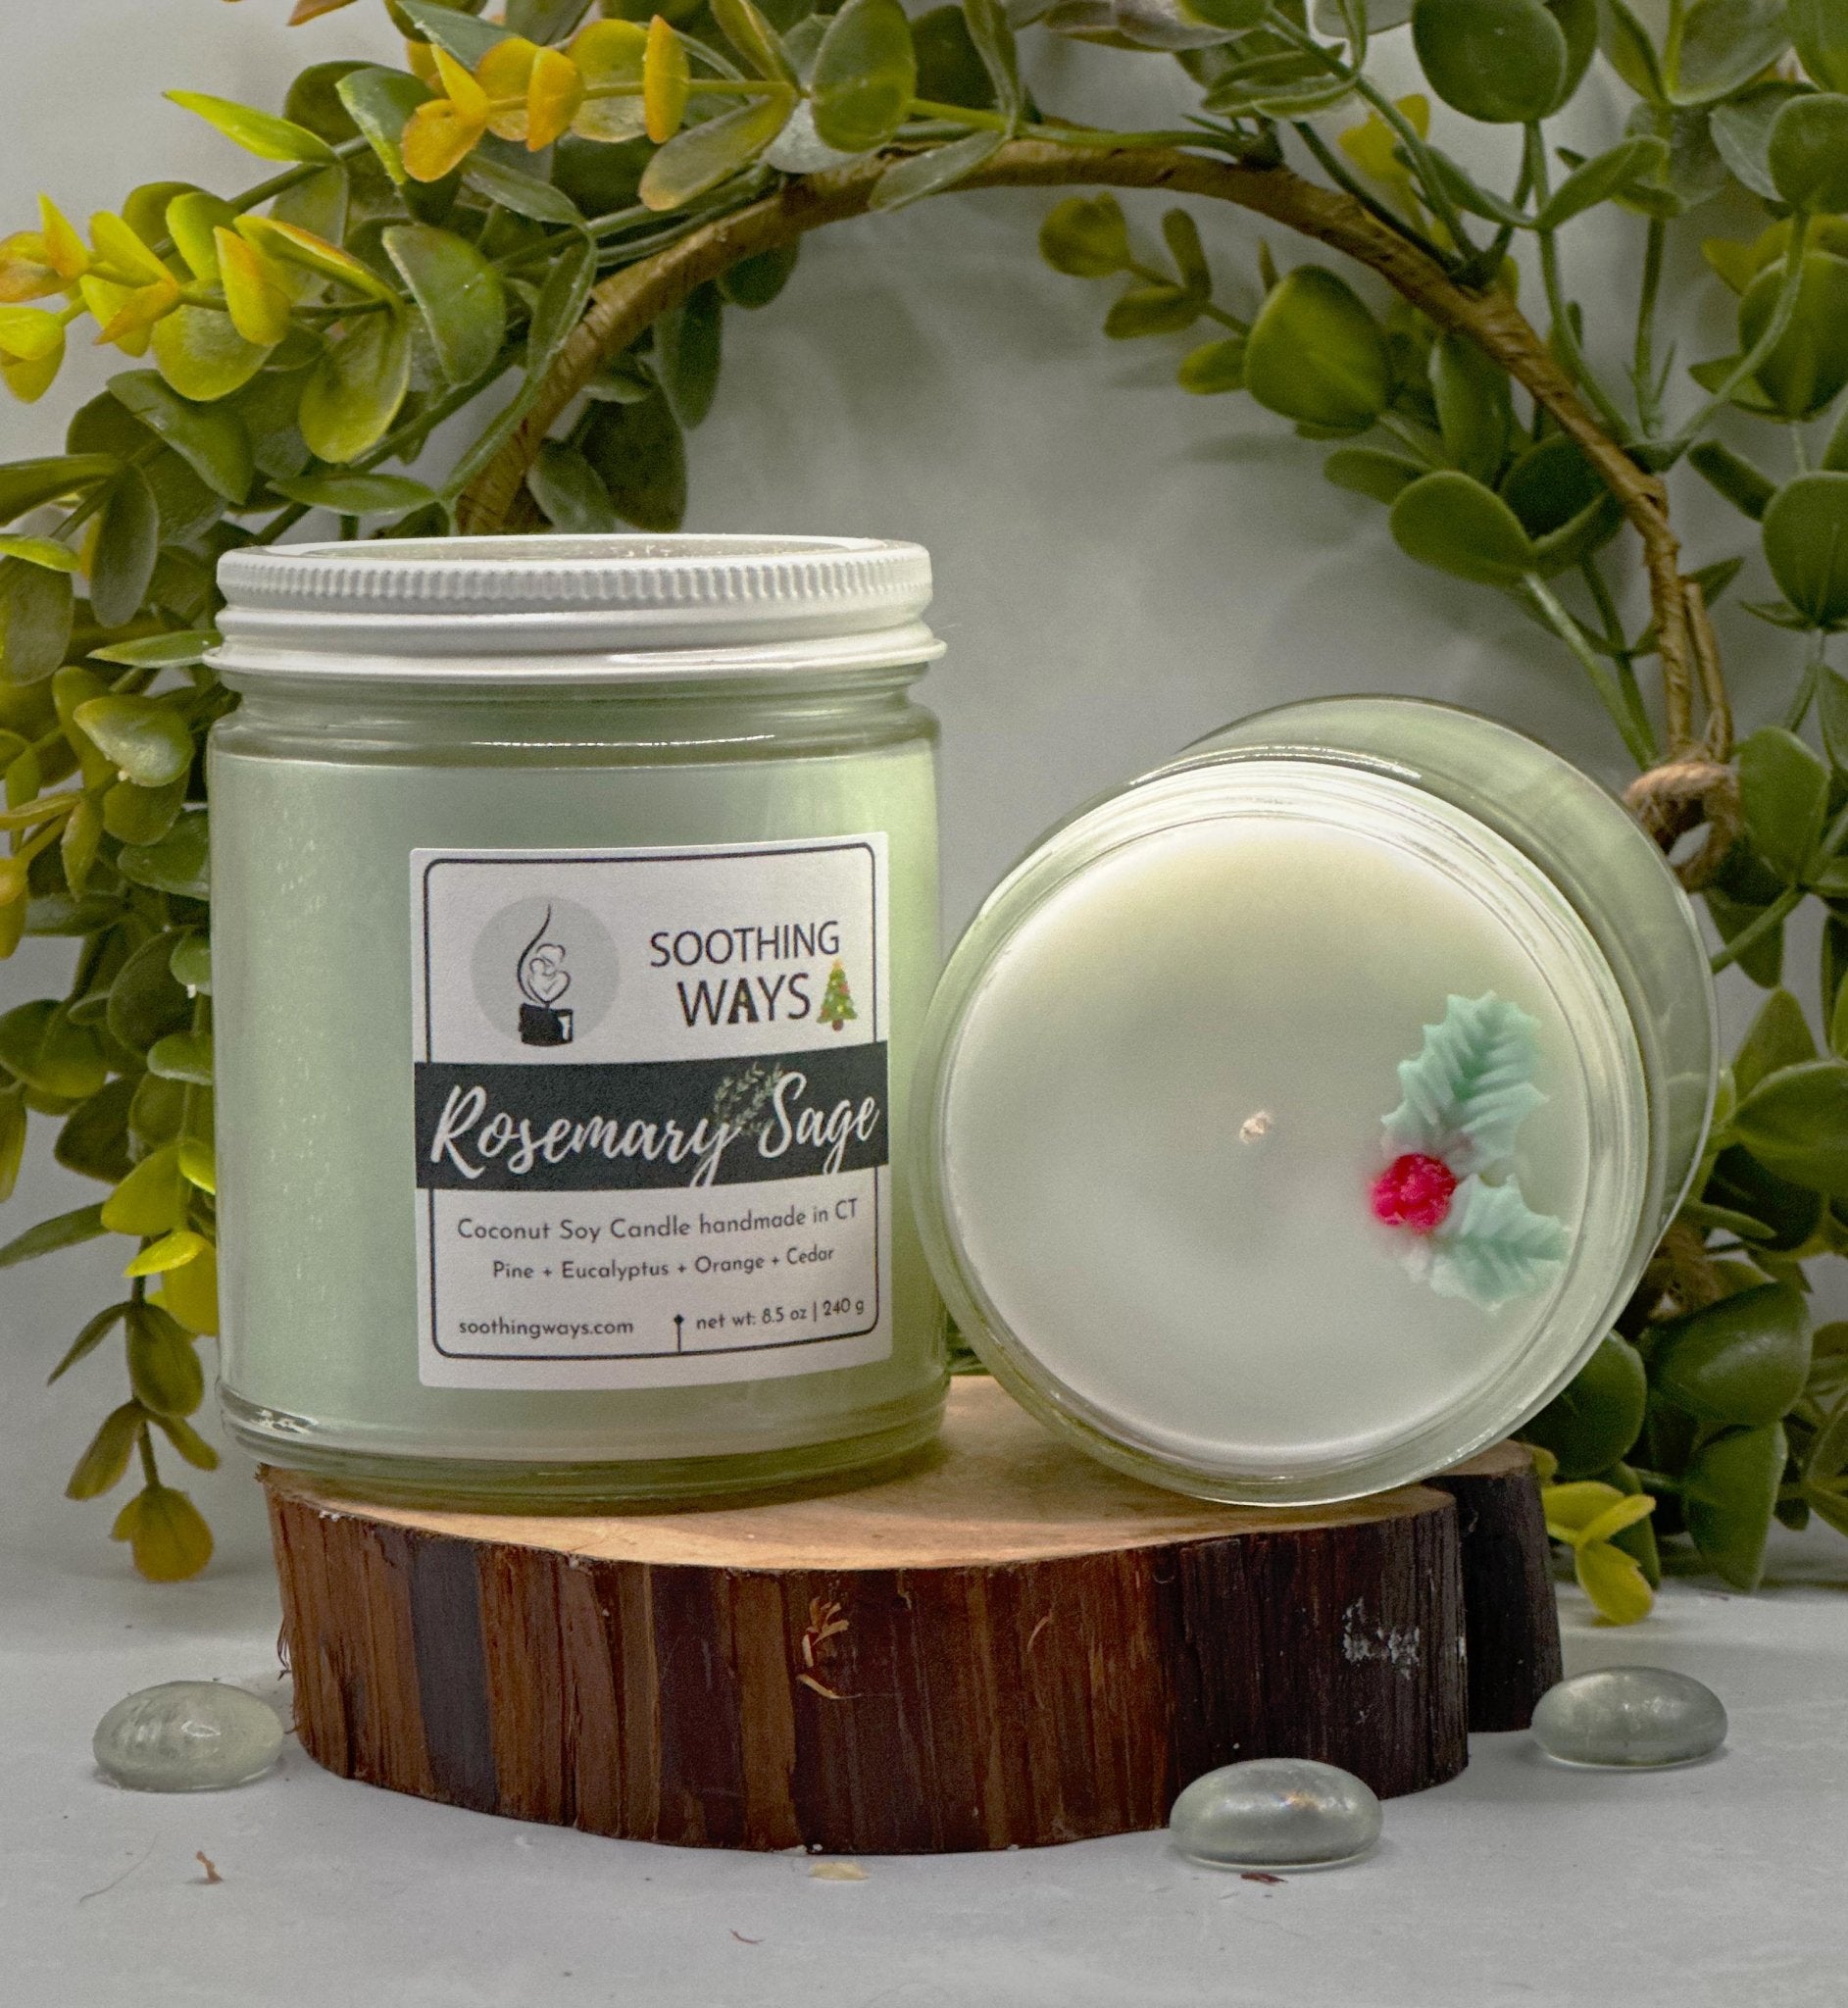 Rosemary and Sage 8 oz Candle - Soothing Ways